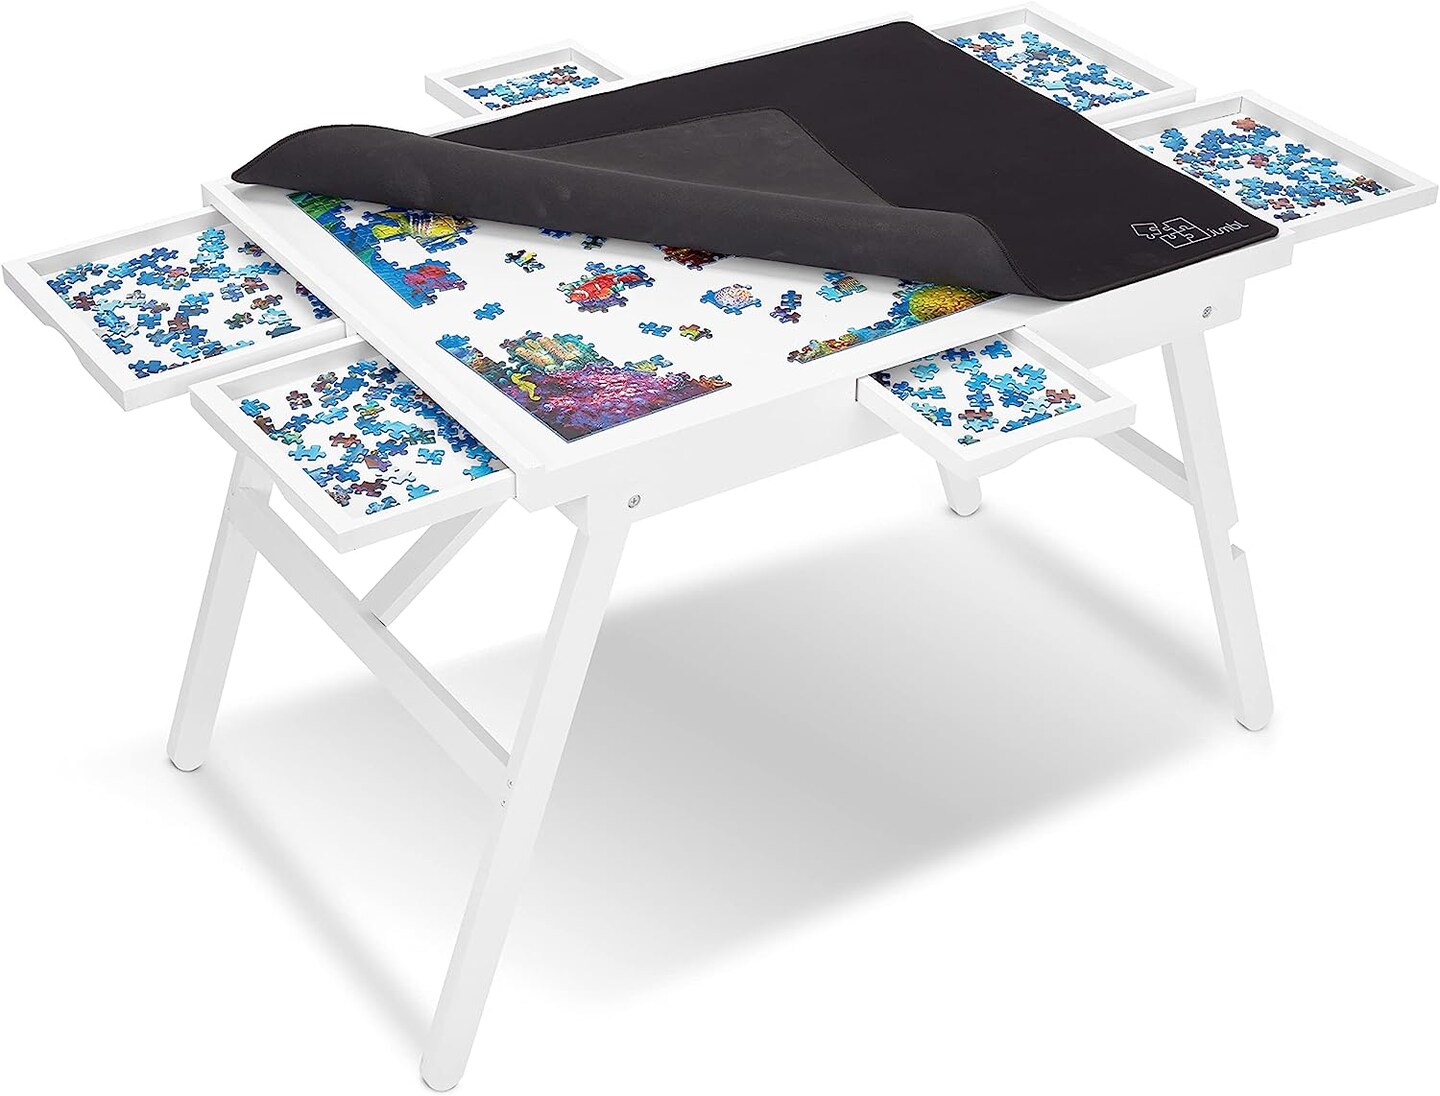  Jigsaw Puzzle Board Table for Adults - 1500 Pieces